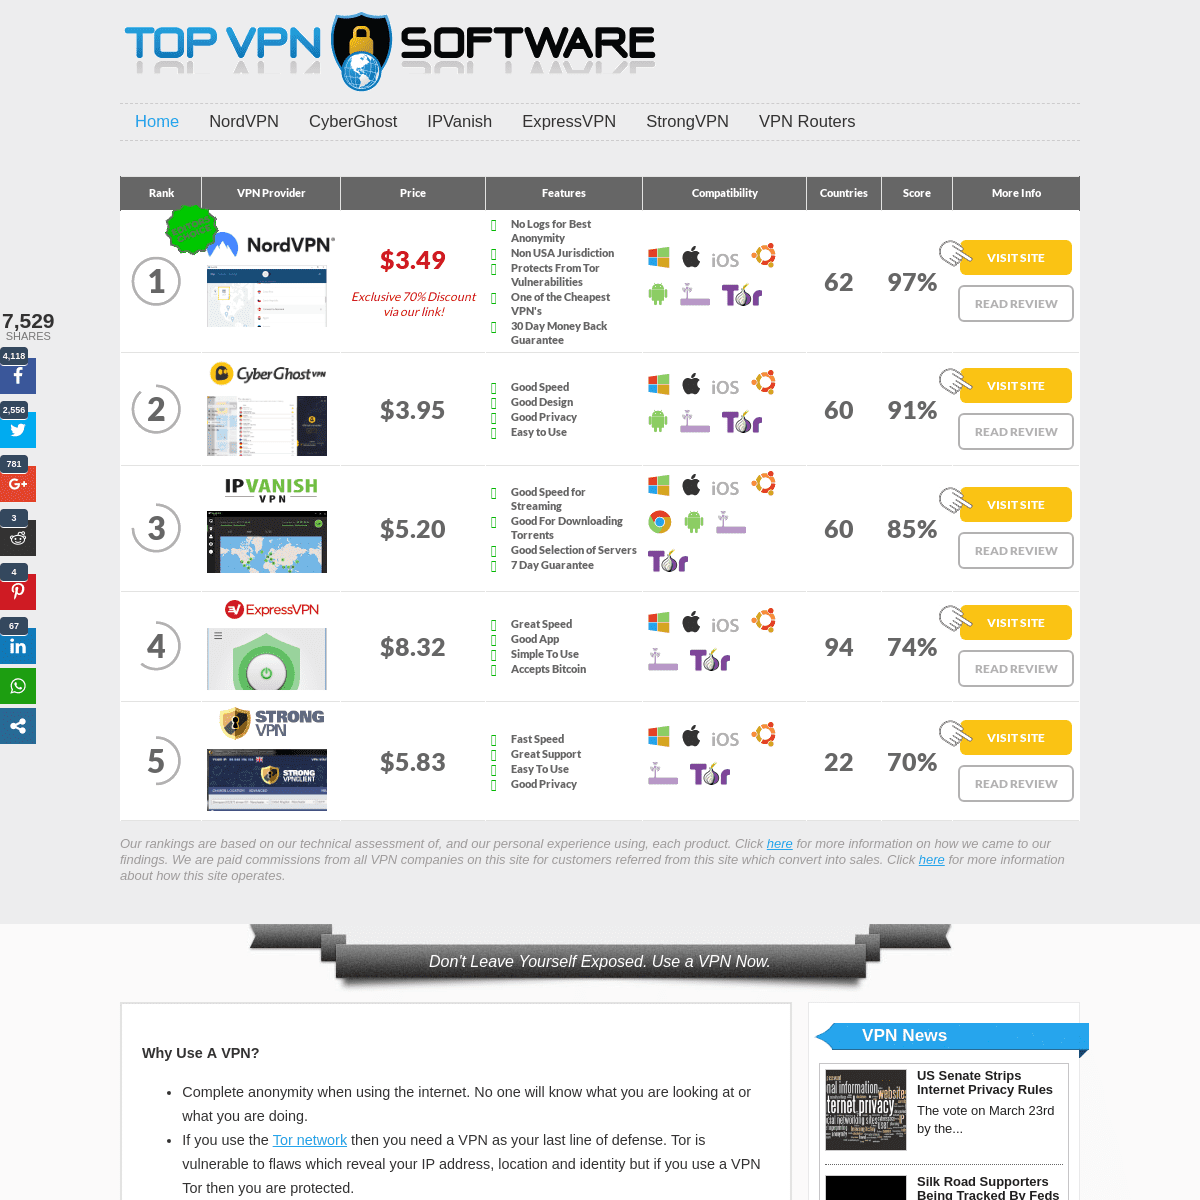 A complete backup of topvpnsoftware.com